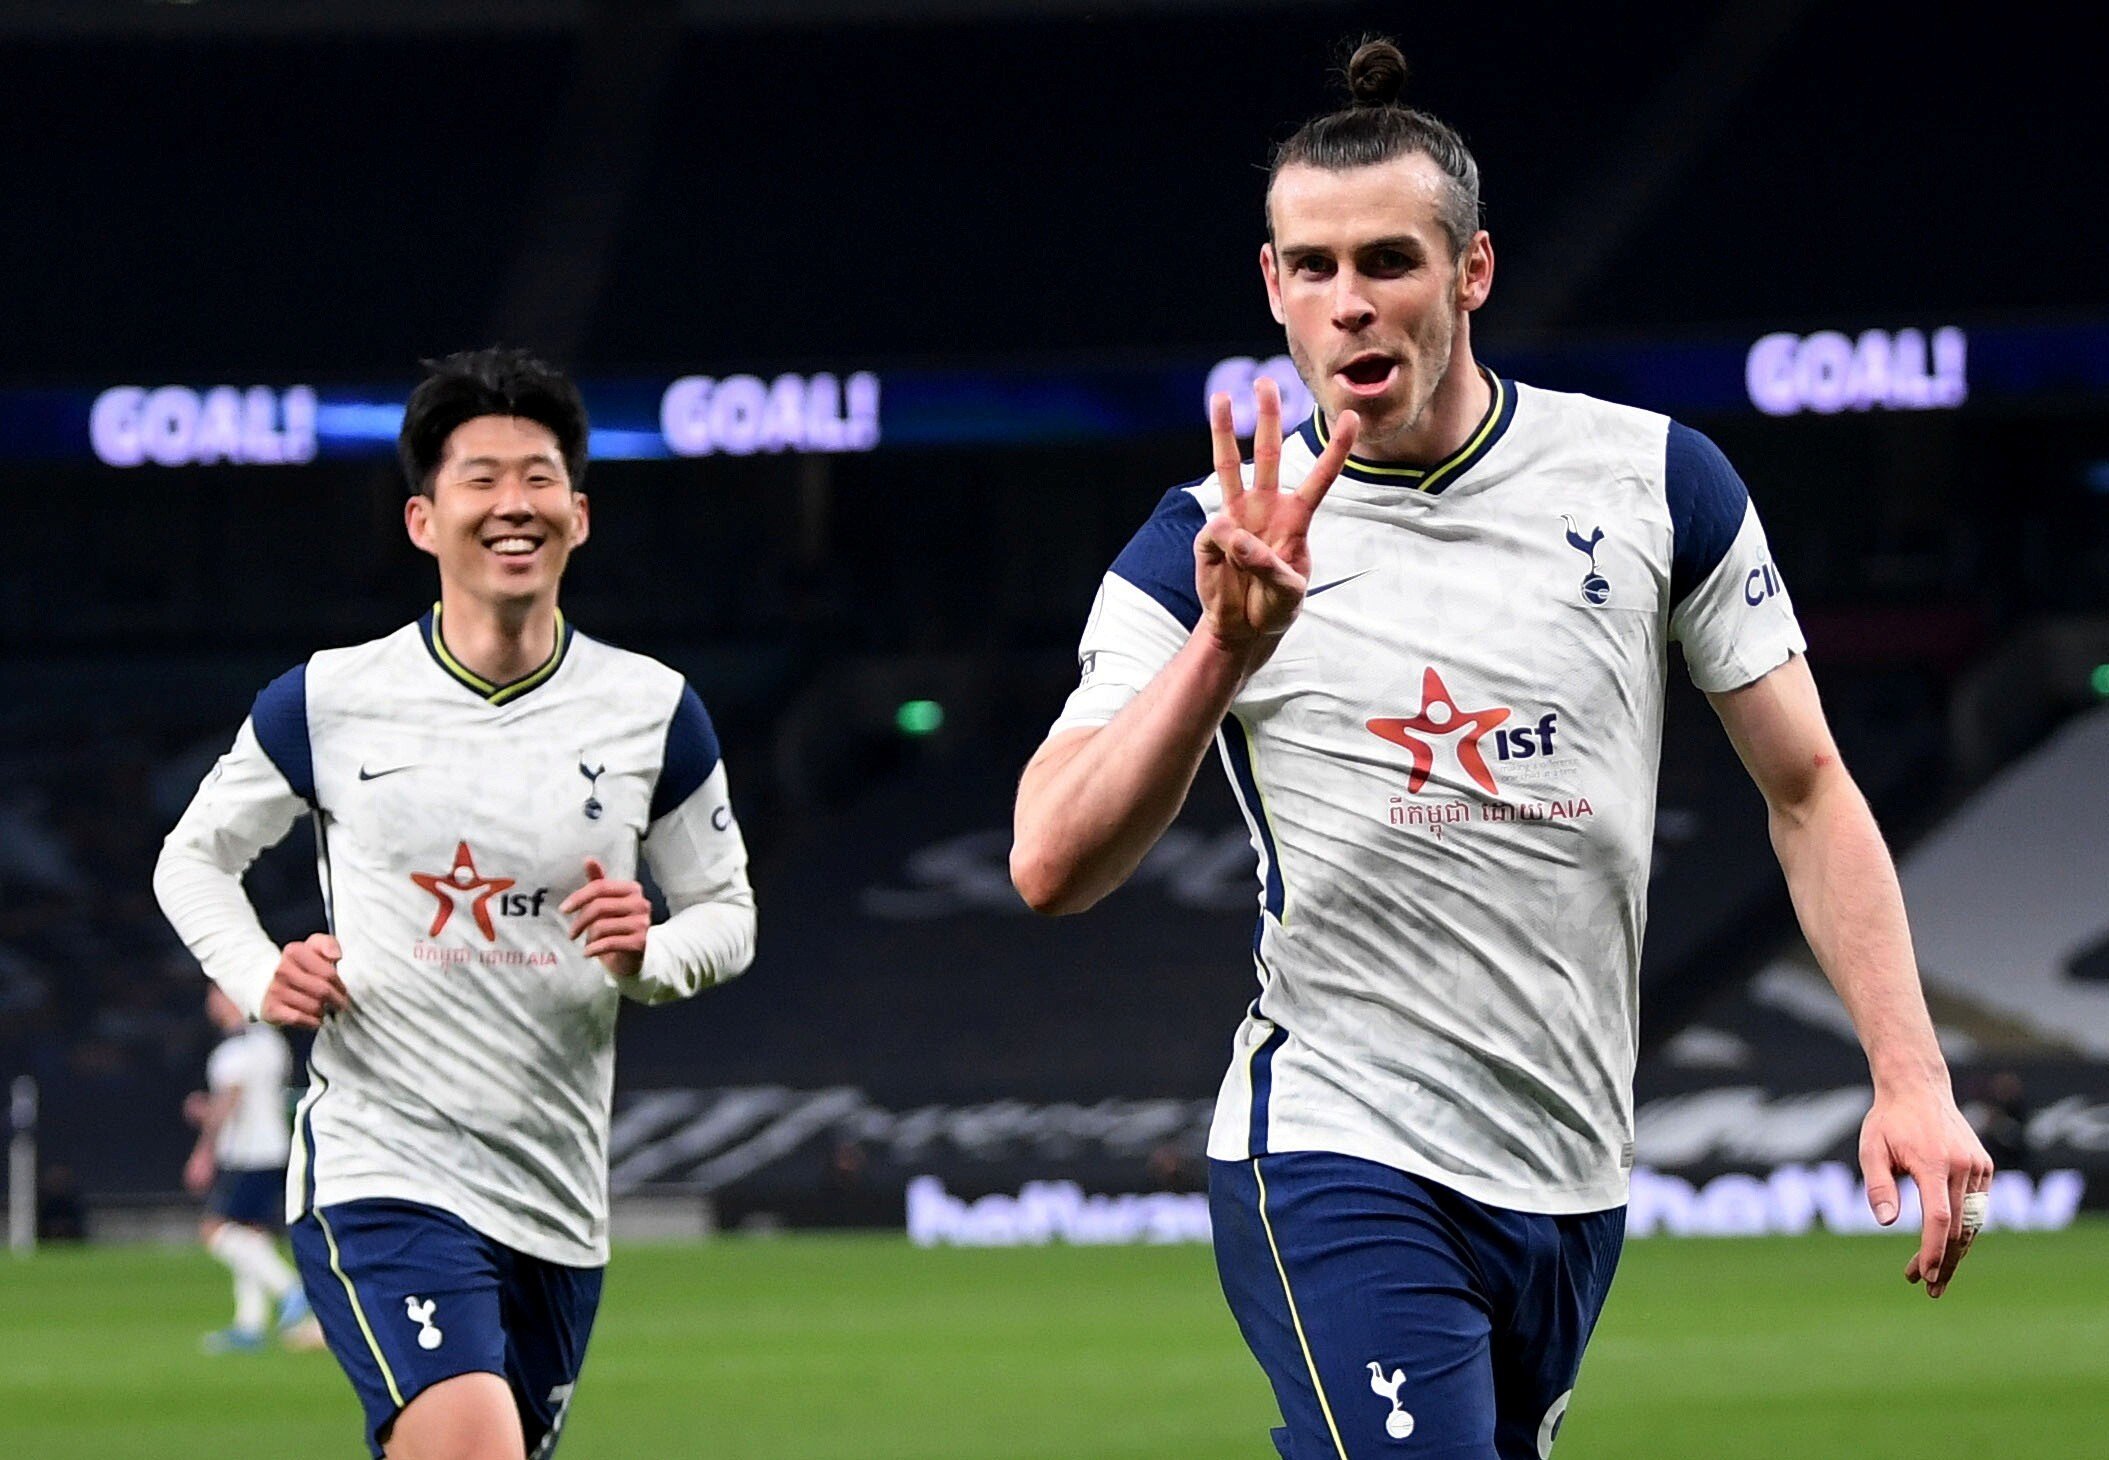 Gareth Bale celebrates scoring Tottenham Hotspur’s third goal and his hat-trick with Son Heung-min. Spurs wore the logo of Cambodian NGO Indochina Starfish Foundation on their shirts. Photo: Reuters